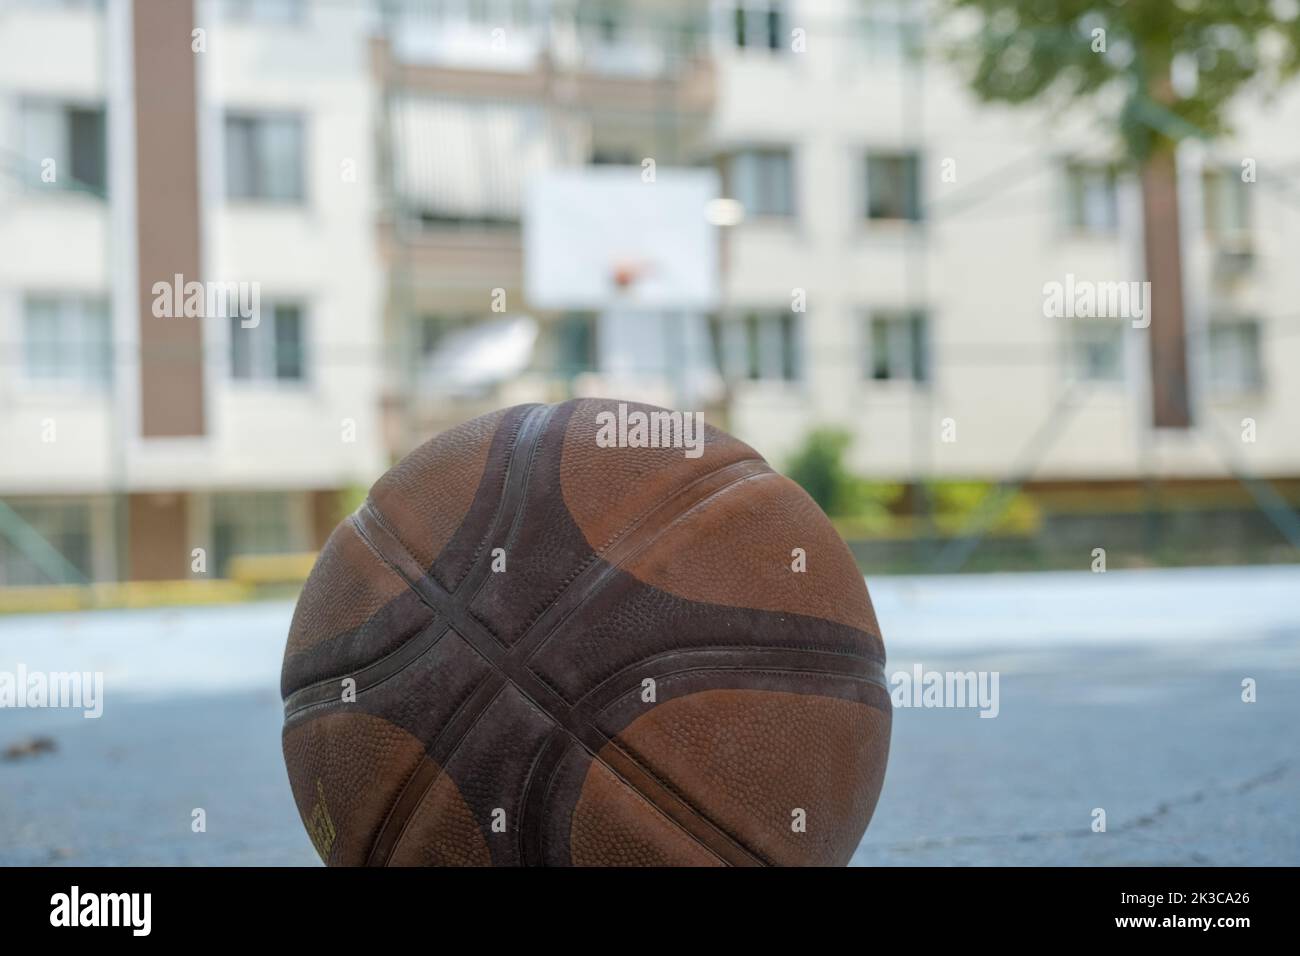 Selective focus basketball ball with basketball hoop and buildings, street basketball concept, no people basketball court, suburban and outdoor sport Stock Photo